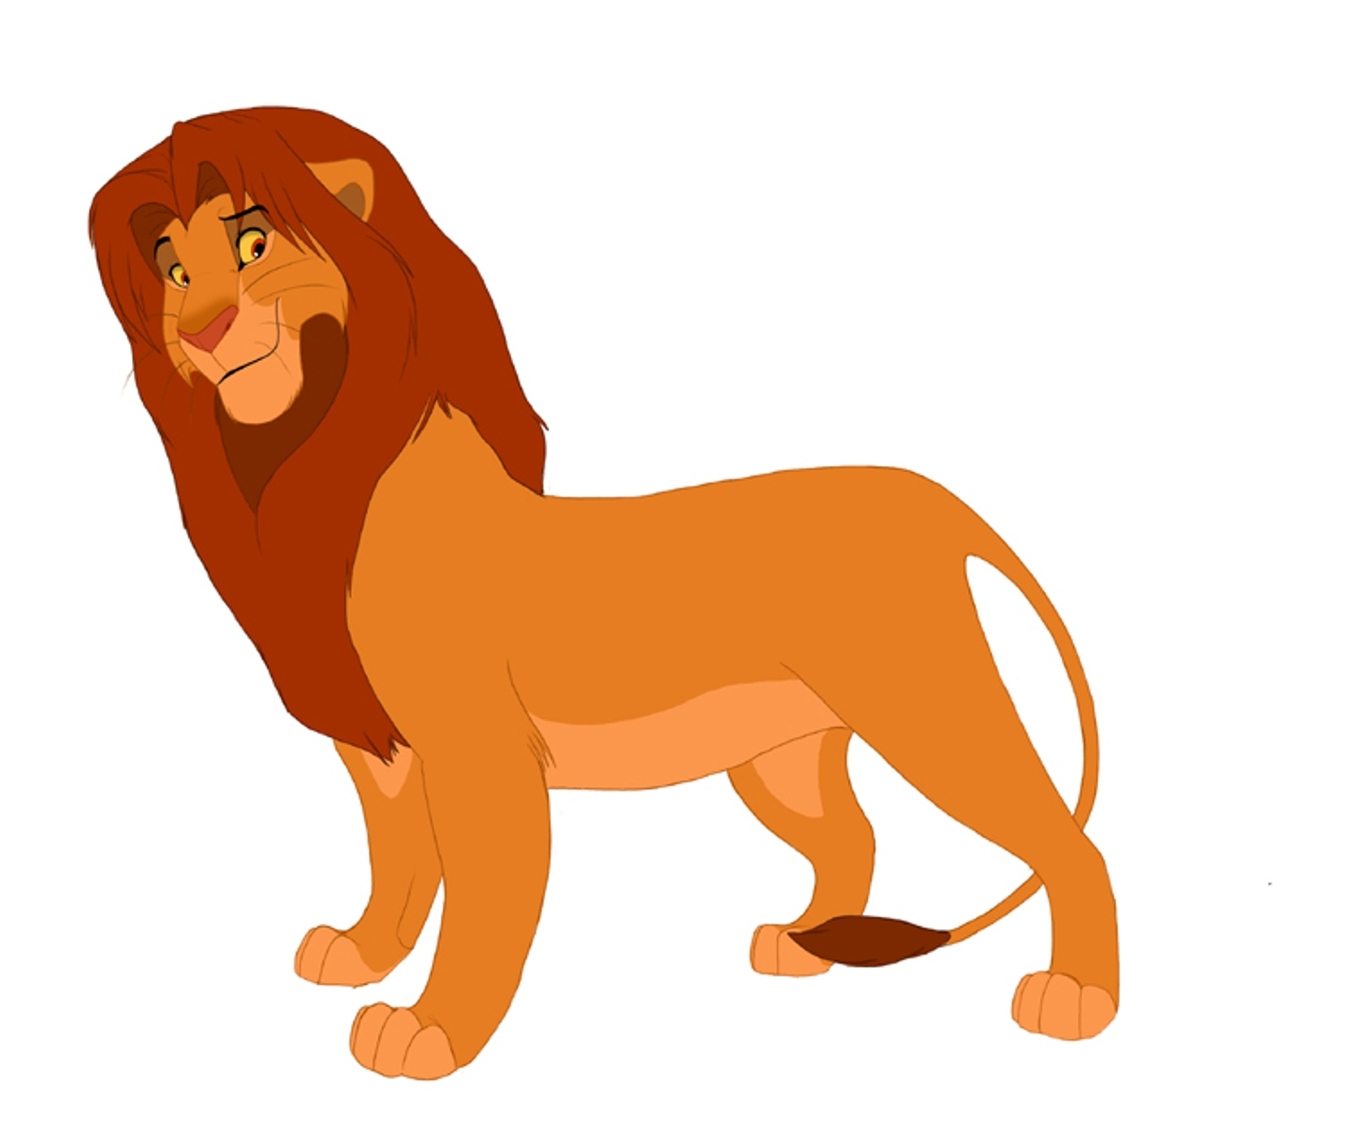 Lion King Simba Wallpaper Download Cartoon Clipart - Free to use ...